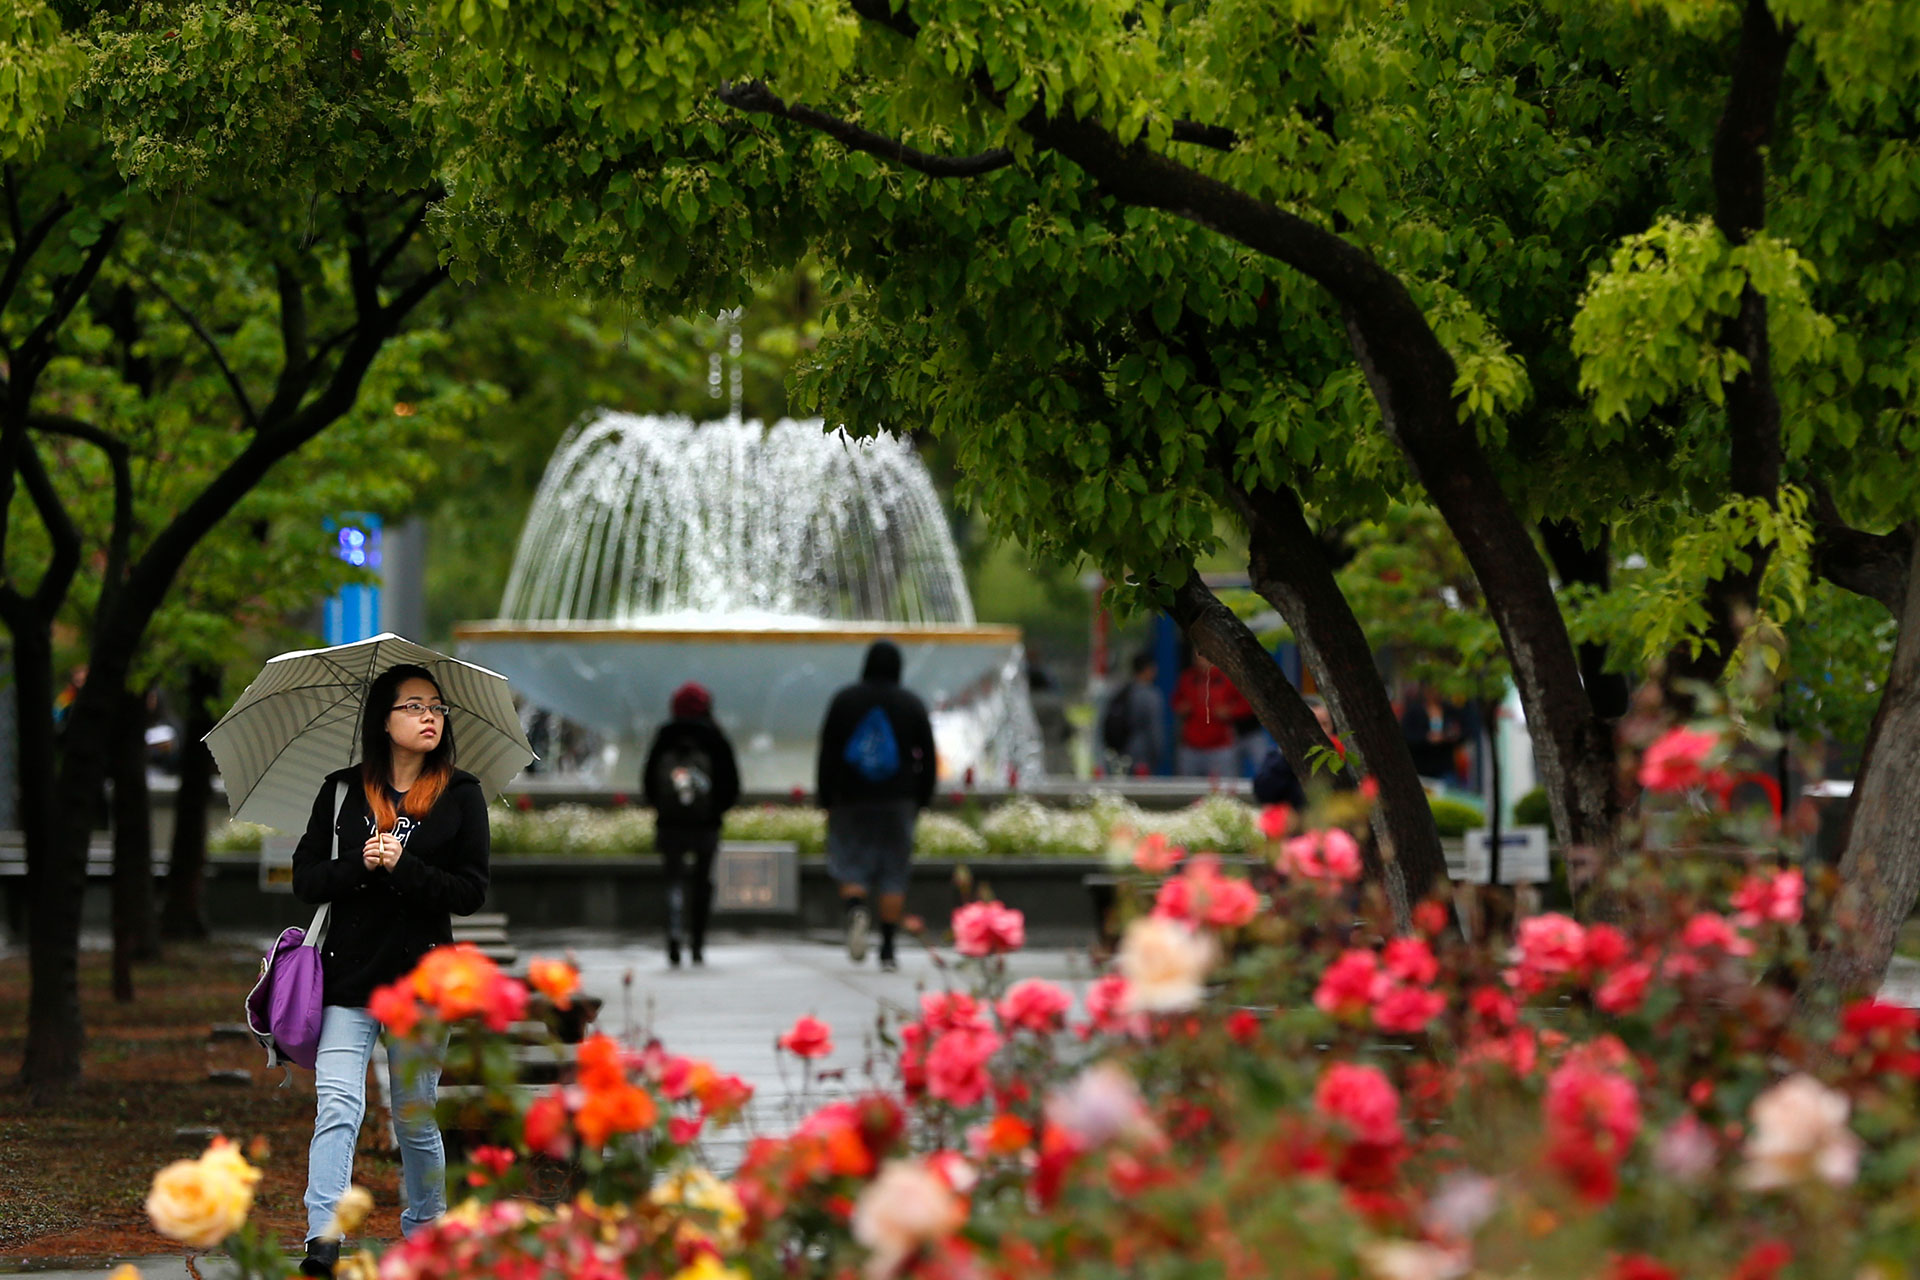 The Fresno State water fountain in spring